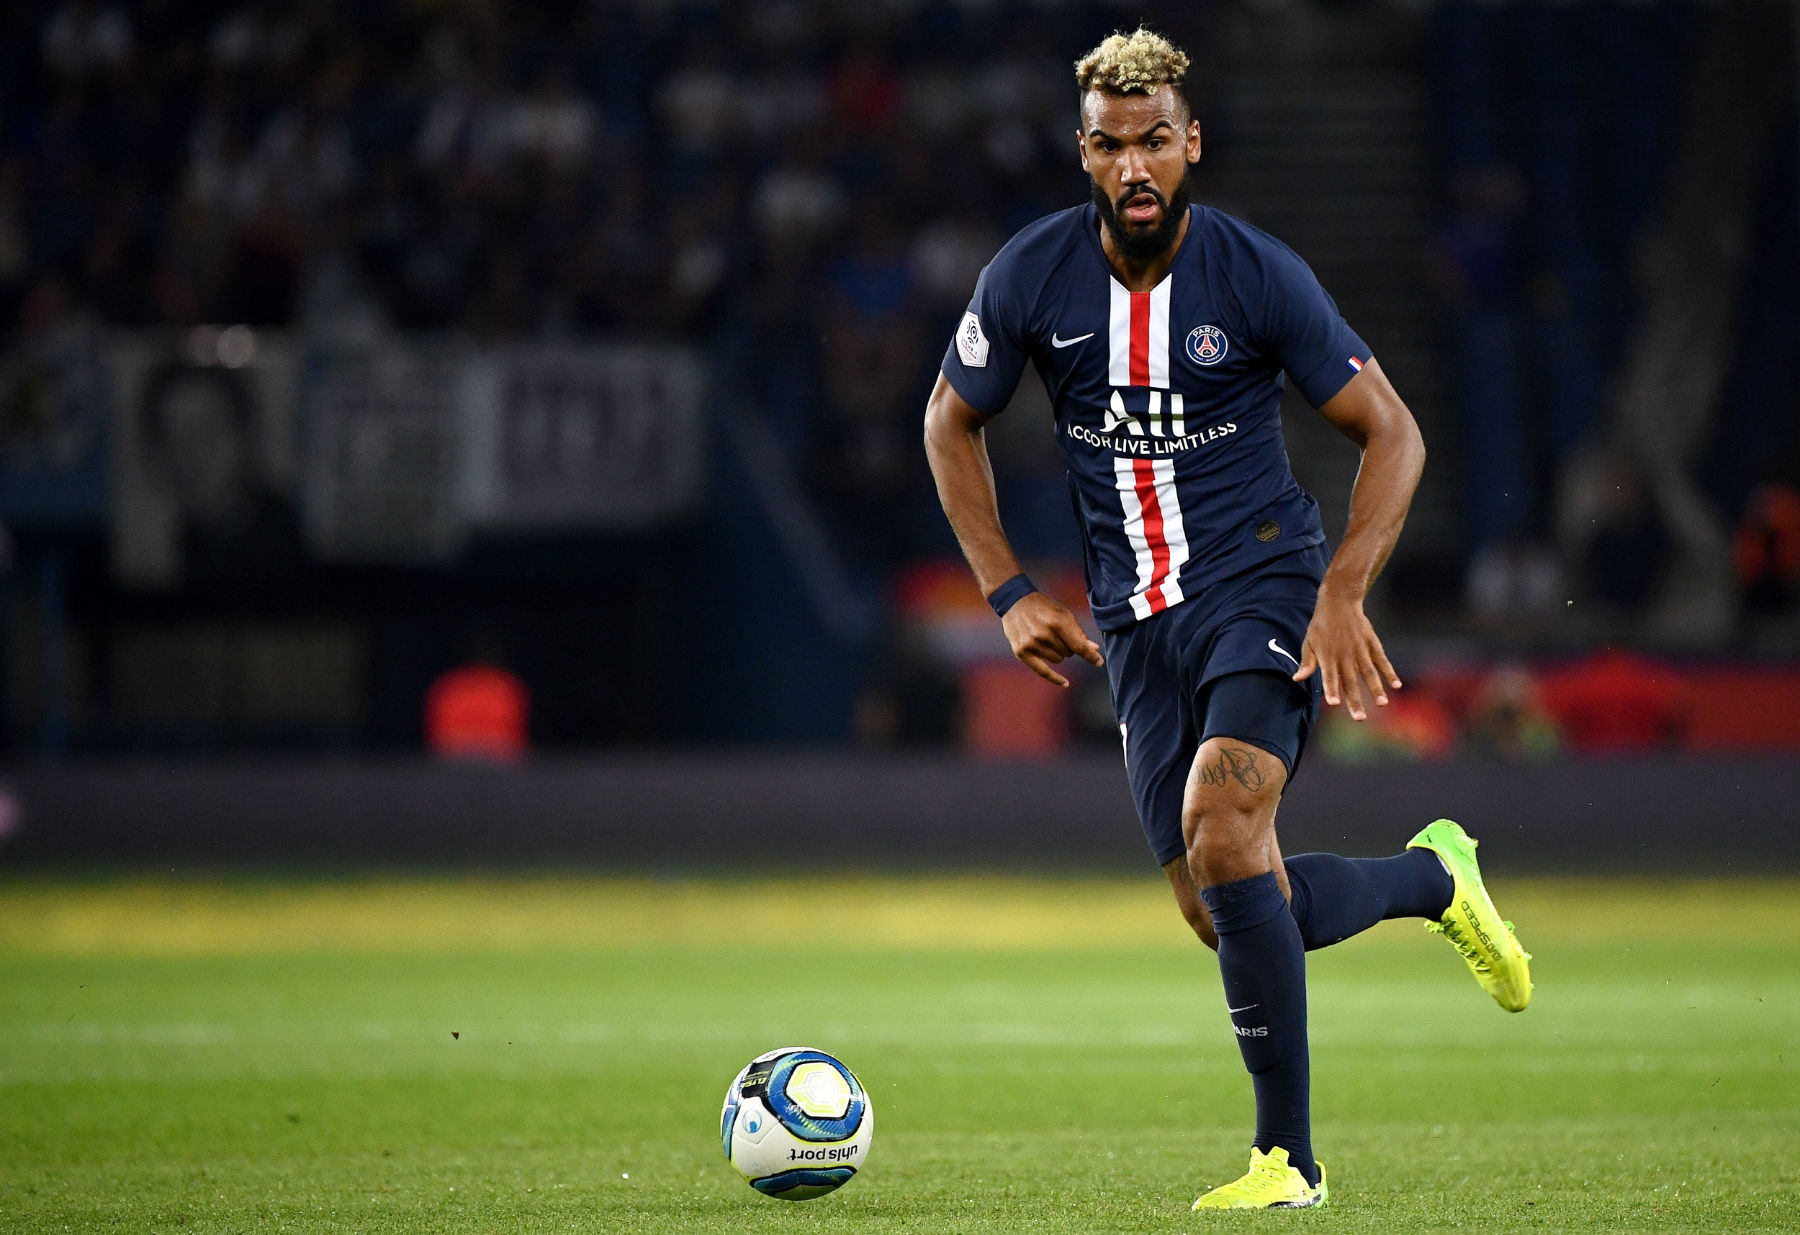 Maxim choupo-moting eric Cameroon rejects